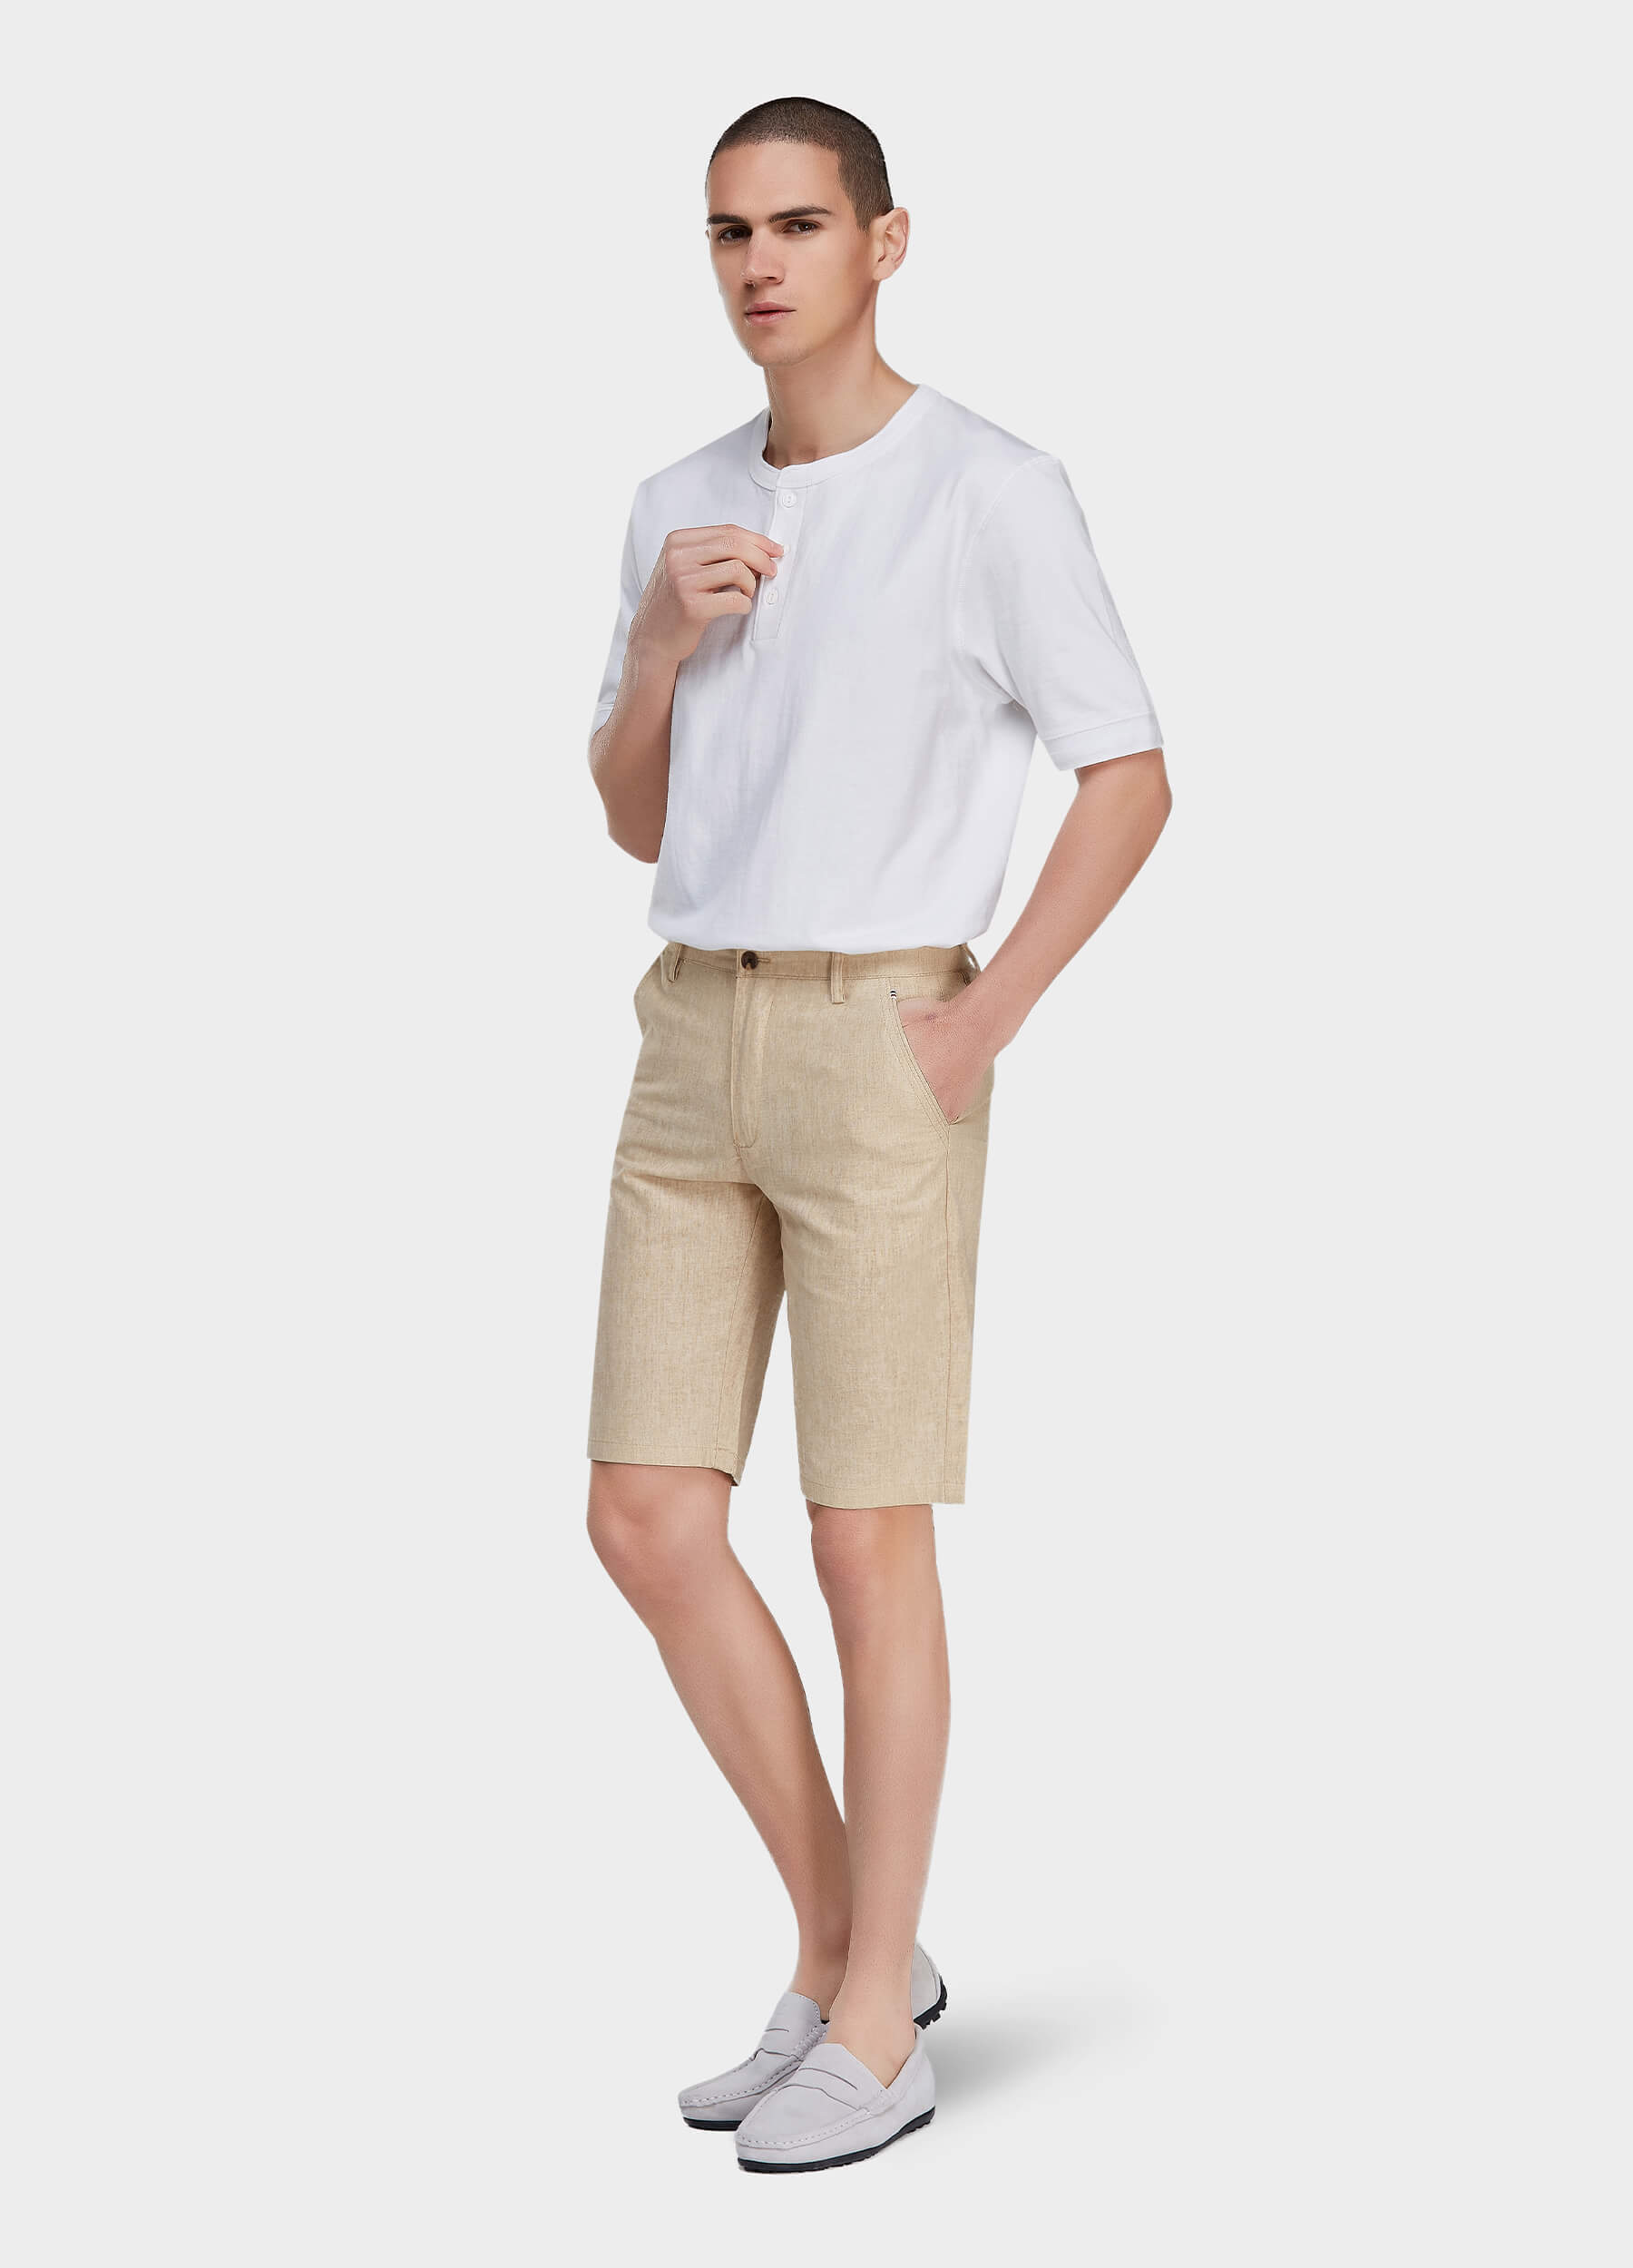 Men's Casual Solid Zipper Fly Button Walk Shorts with Slant Pockets-Beige side view